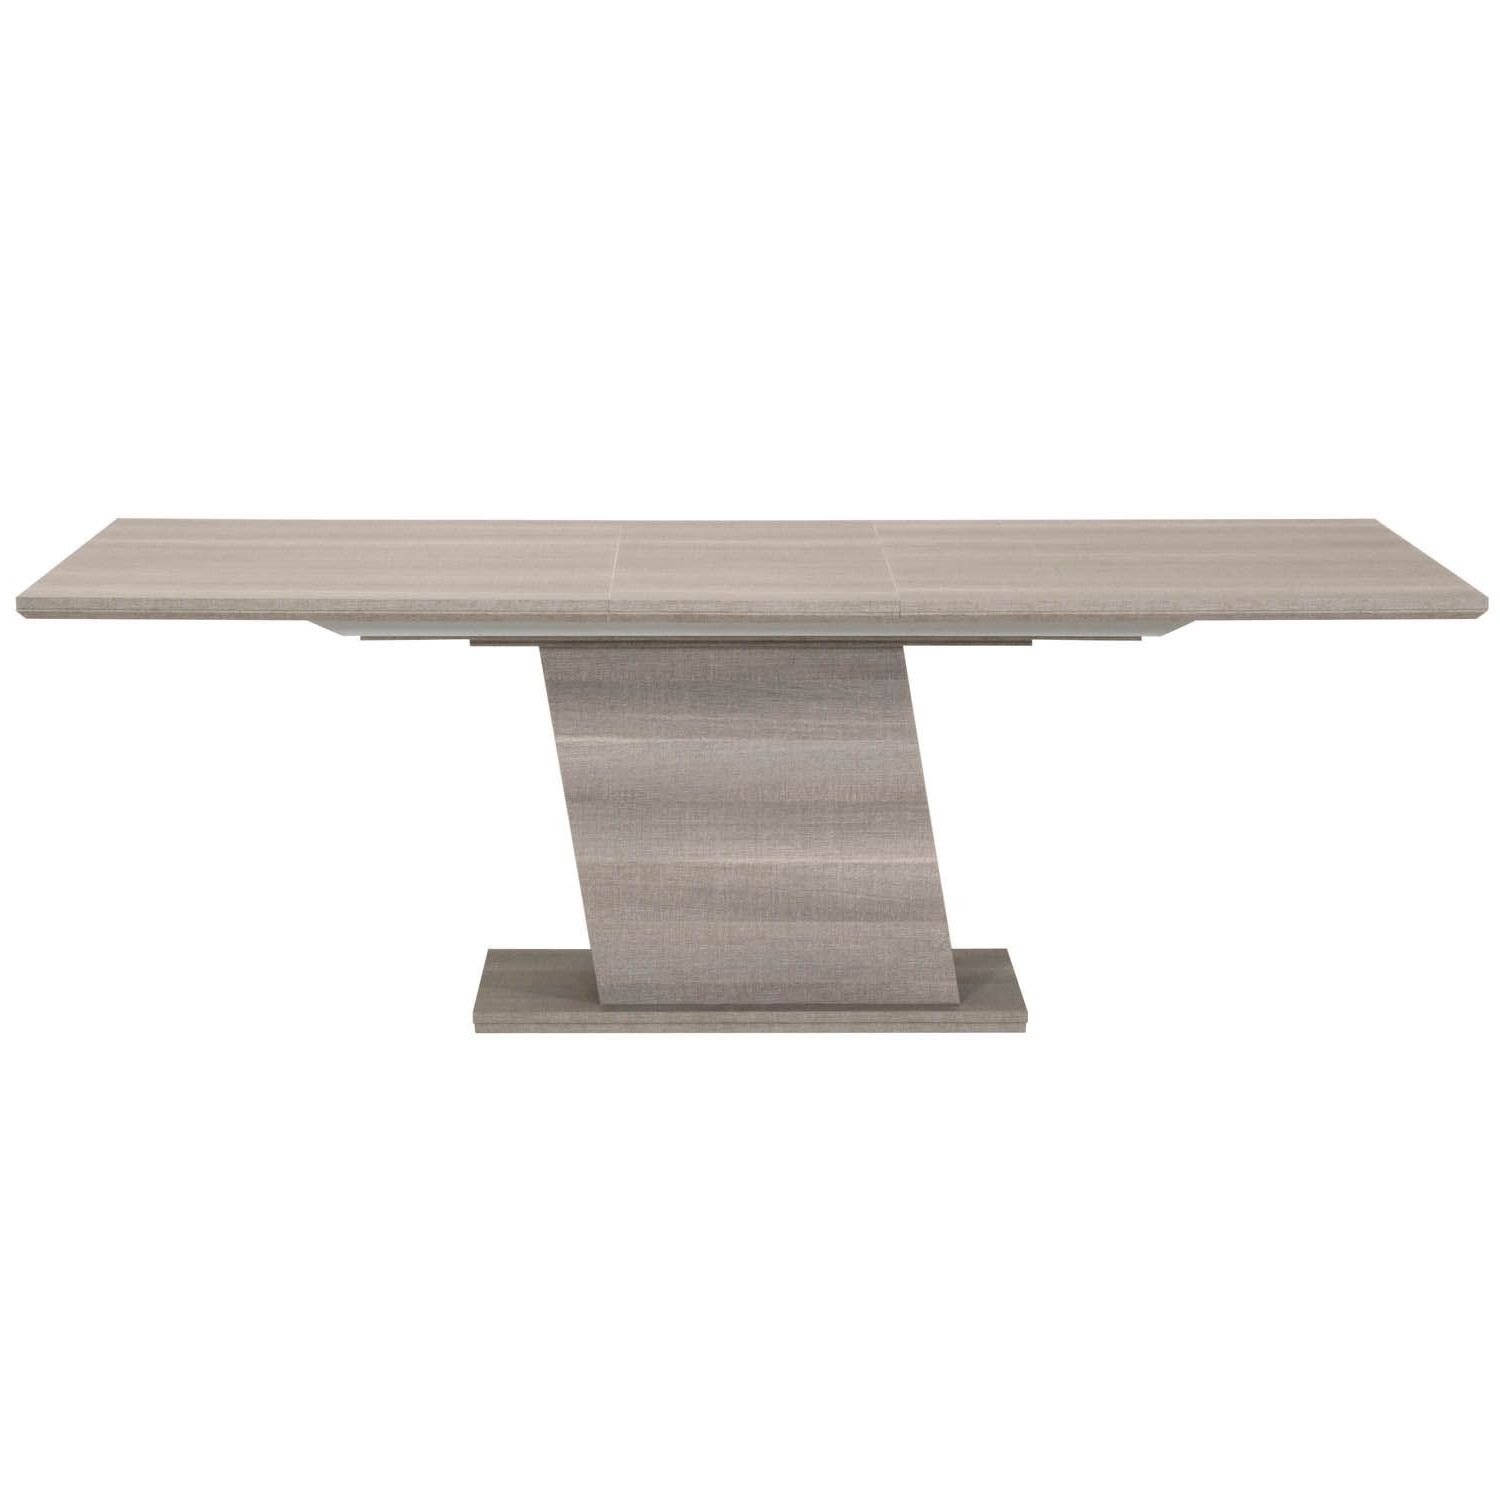 The Best Forte Extension Dining Table Image For Trends And White Intended For Newest Teagan Extension Dining Tables (View 10 of 25)